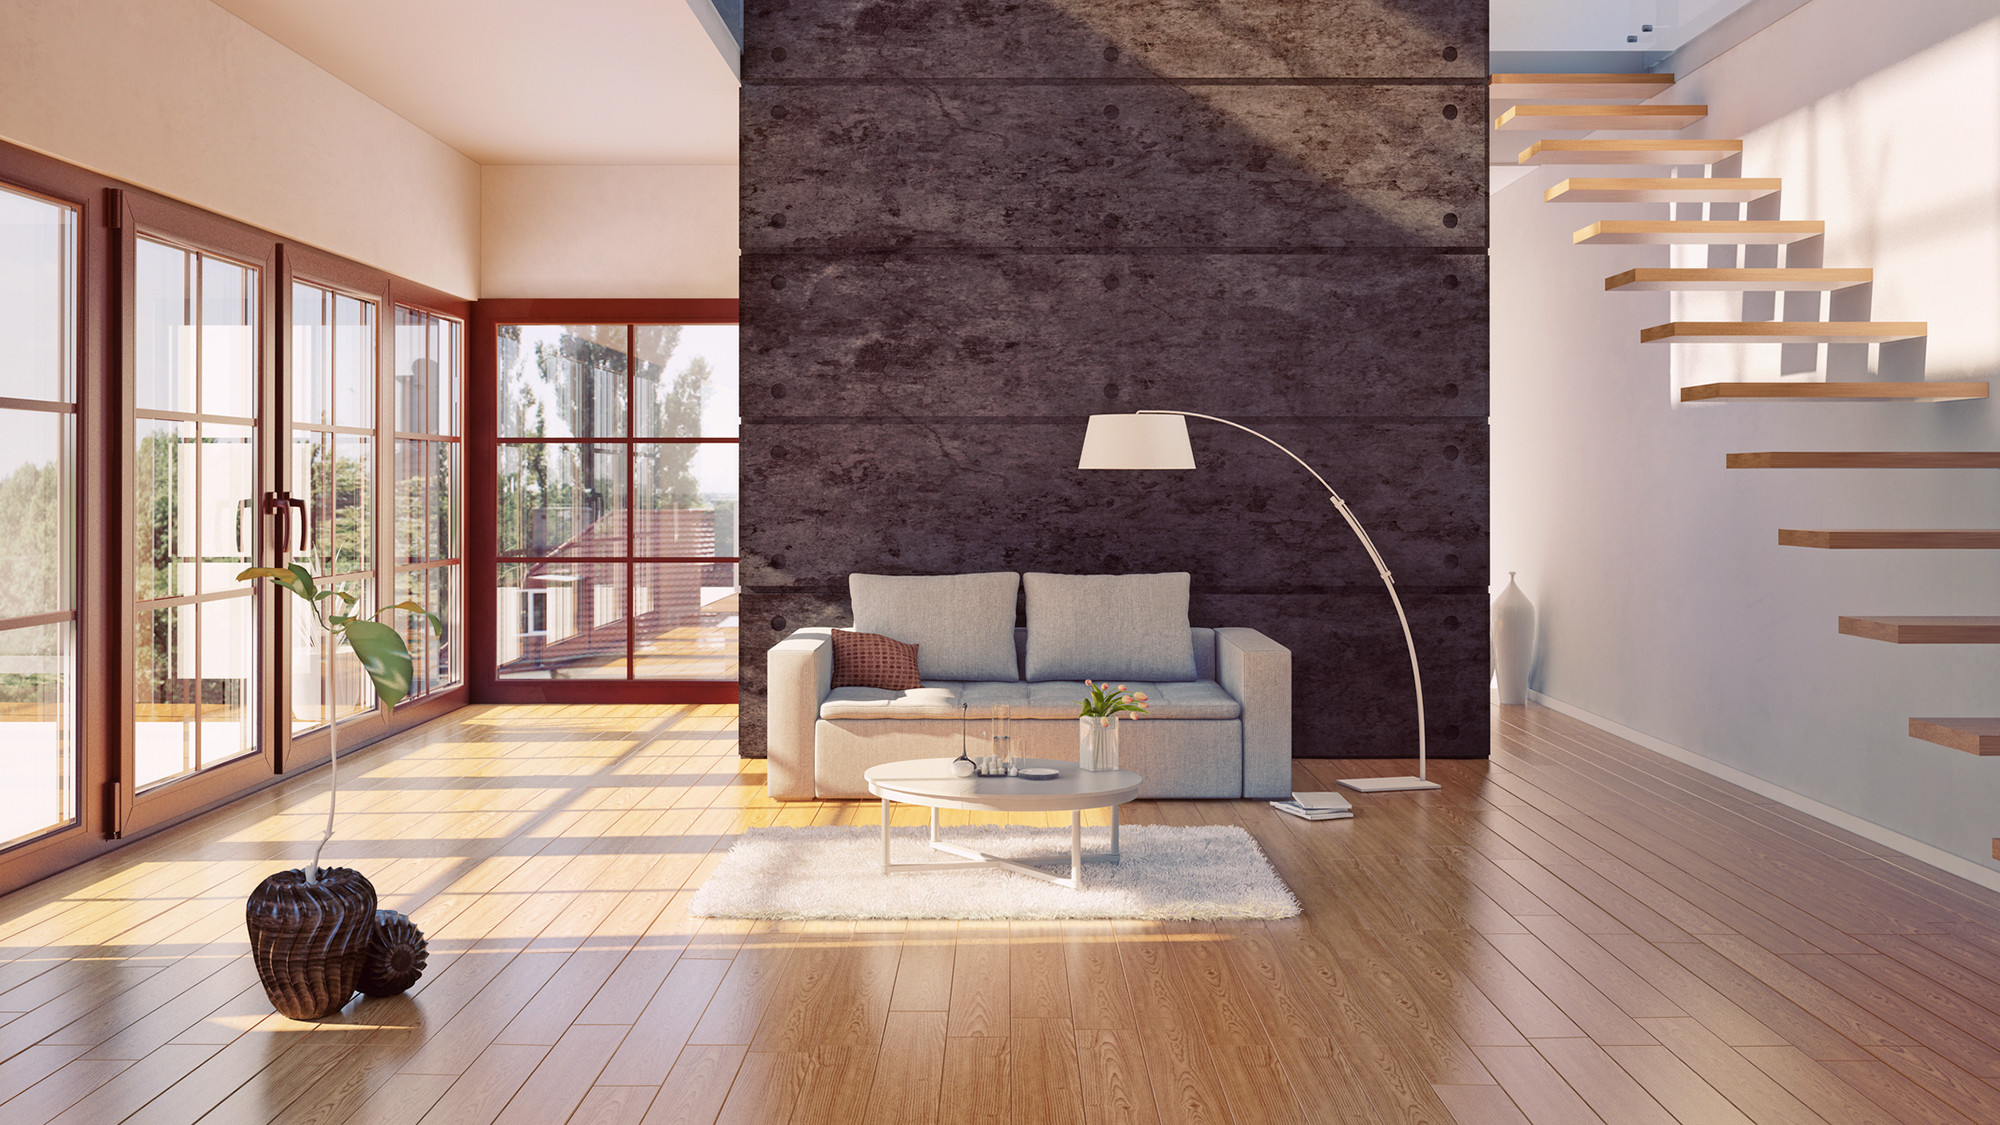 26 Famous Average Cost to Install Laminate Hardwood Floors 2022 free download average cost to install laminate hardwood floors of do hardwood floors provide the best return on investment realtor coma intended for hardwood floors investment